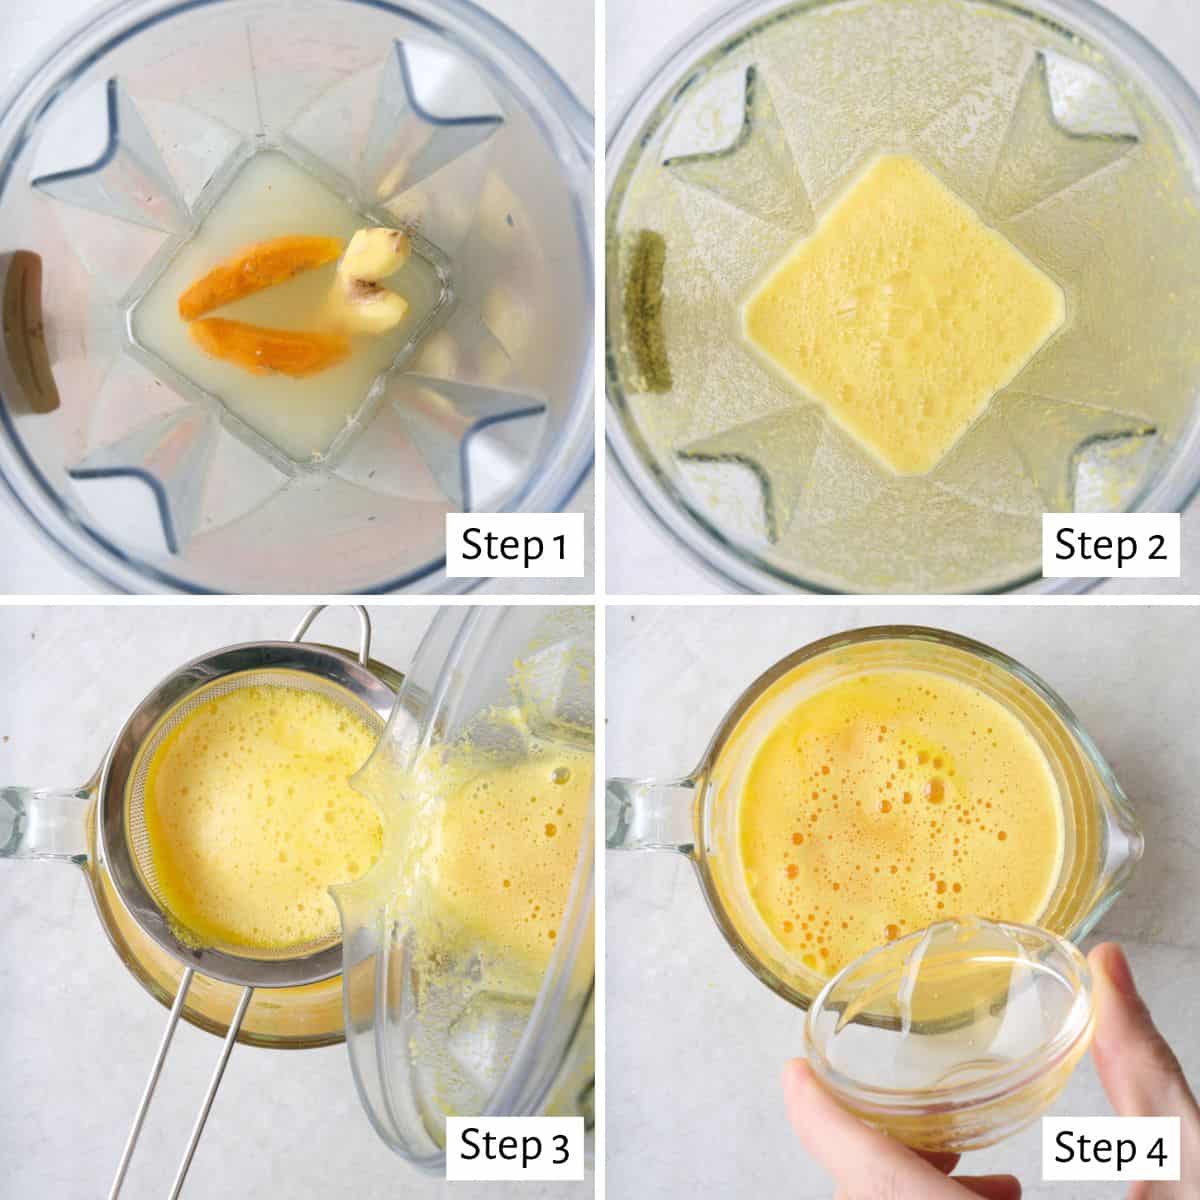 4-image collage of making wellness shots: 1 - Half-way peeled ginger, turmeric, and lemon juice in a blender before blending; 2 - After blending and smooth; 3 - Mixture in a fine mesh sieve over measuring cup (for easy pouring); 4 - Final product in measuring cup while drizzling in honey.